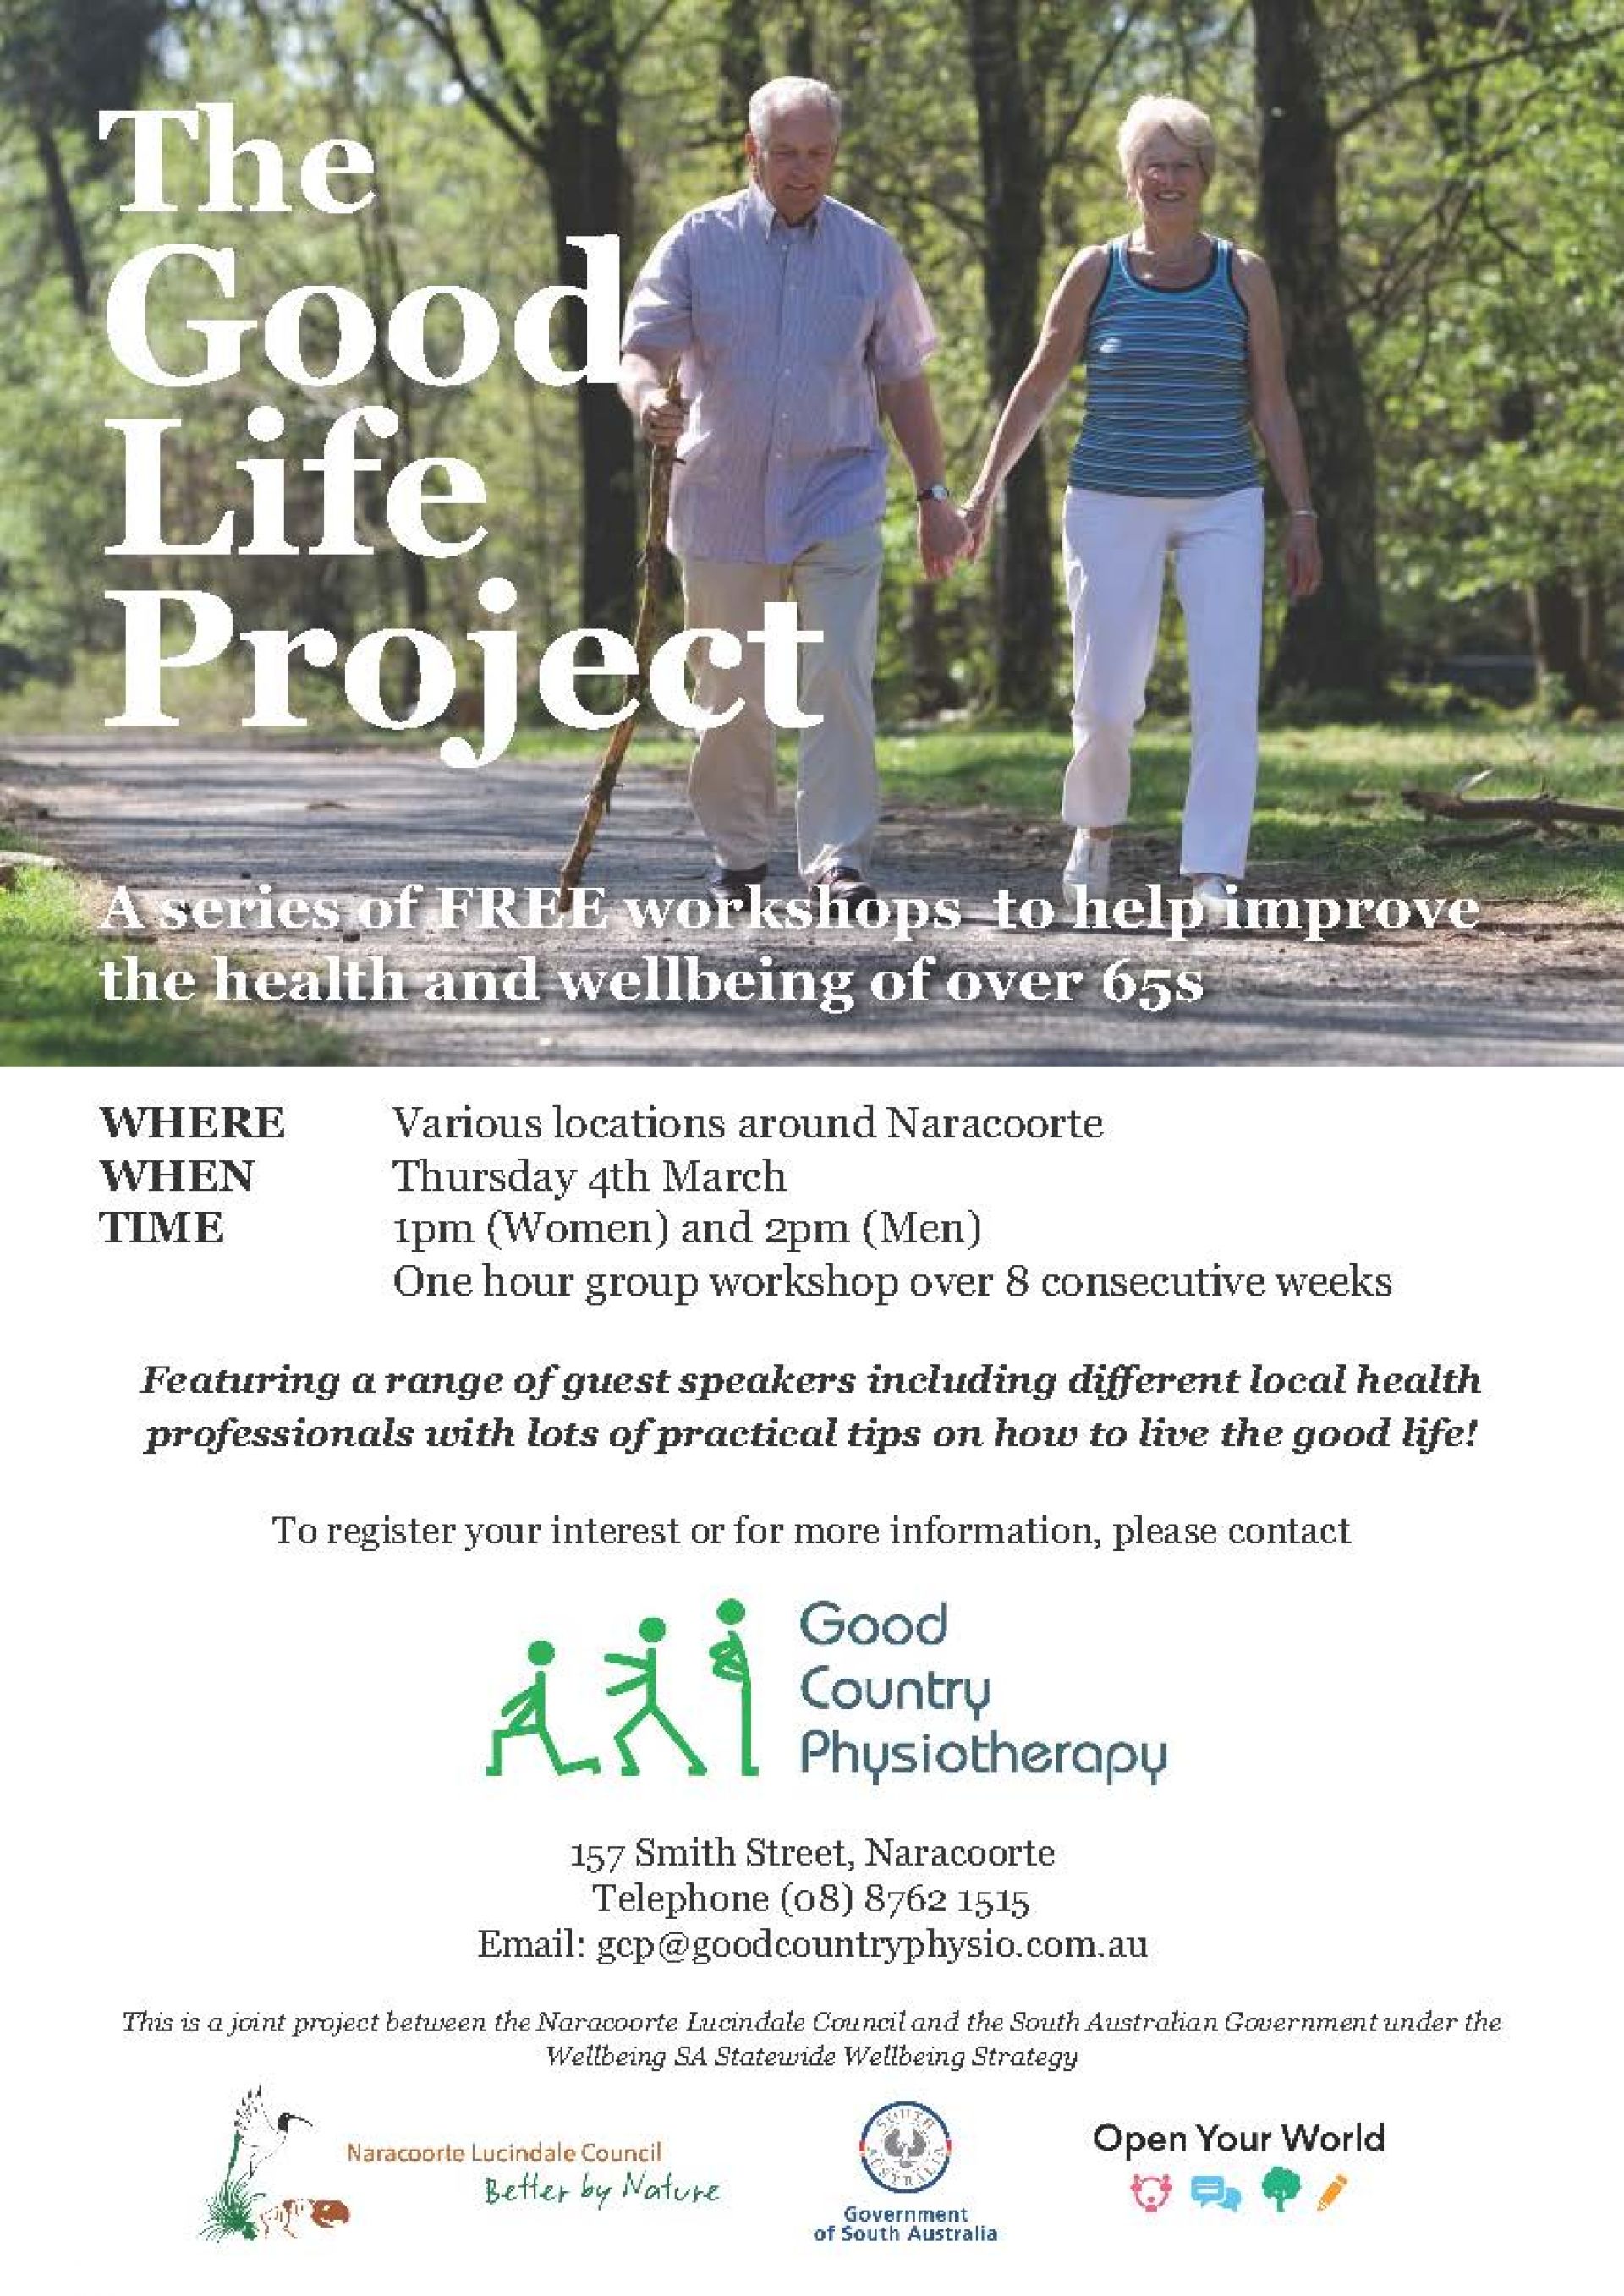 The Good Life Project